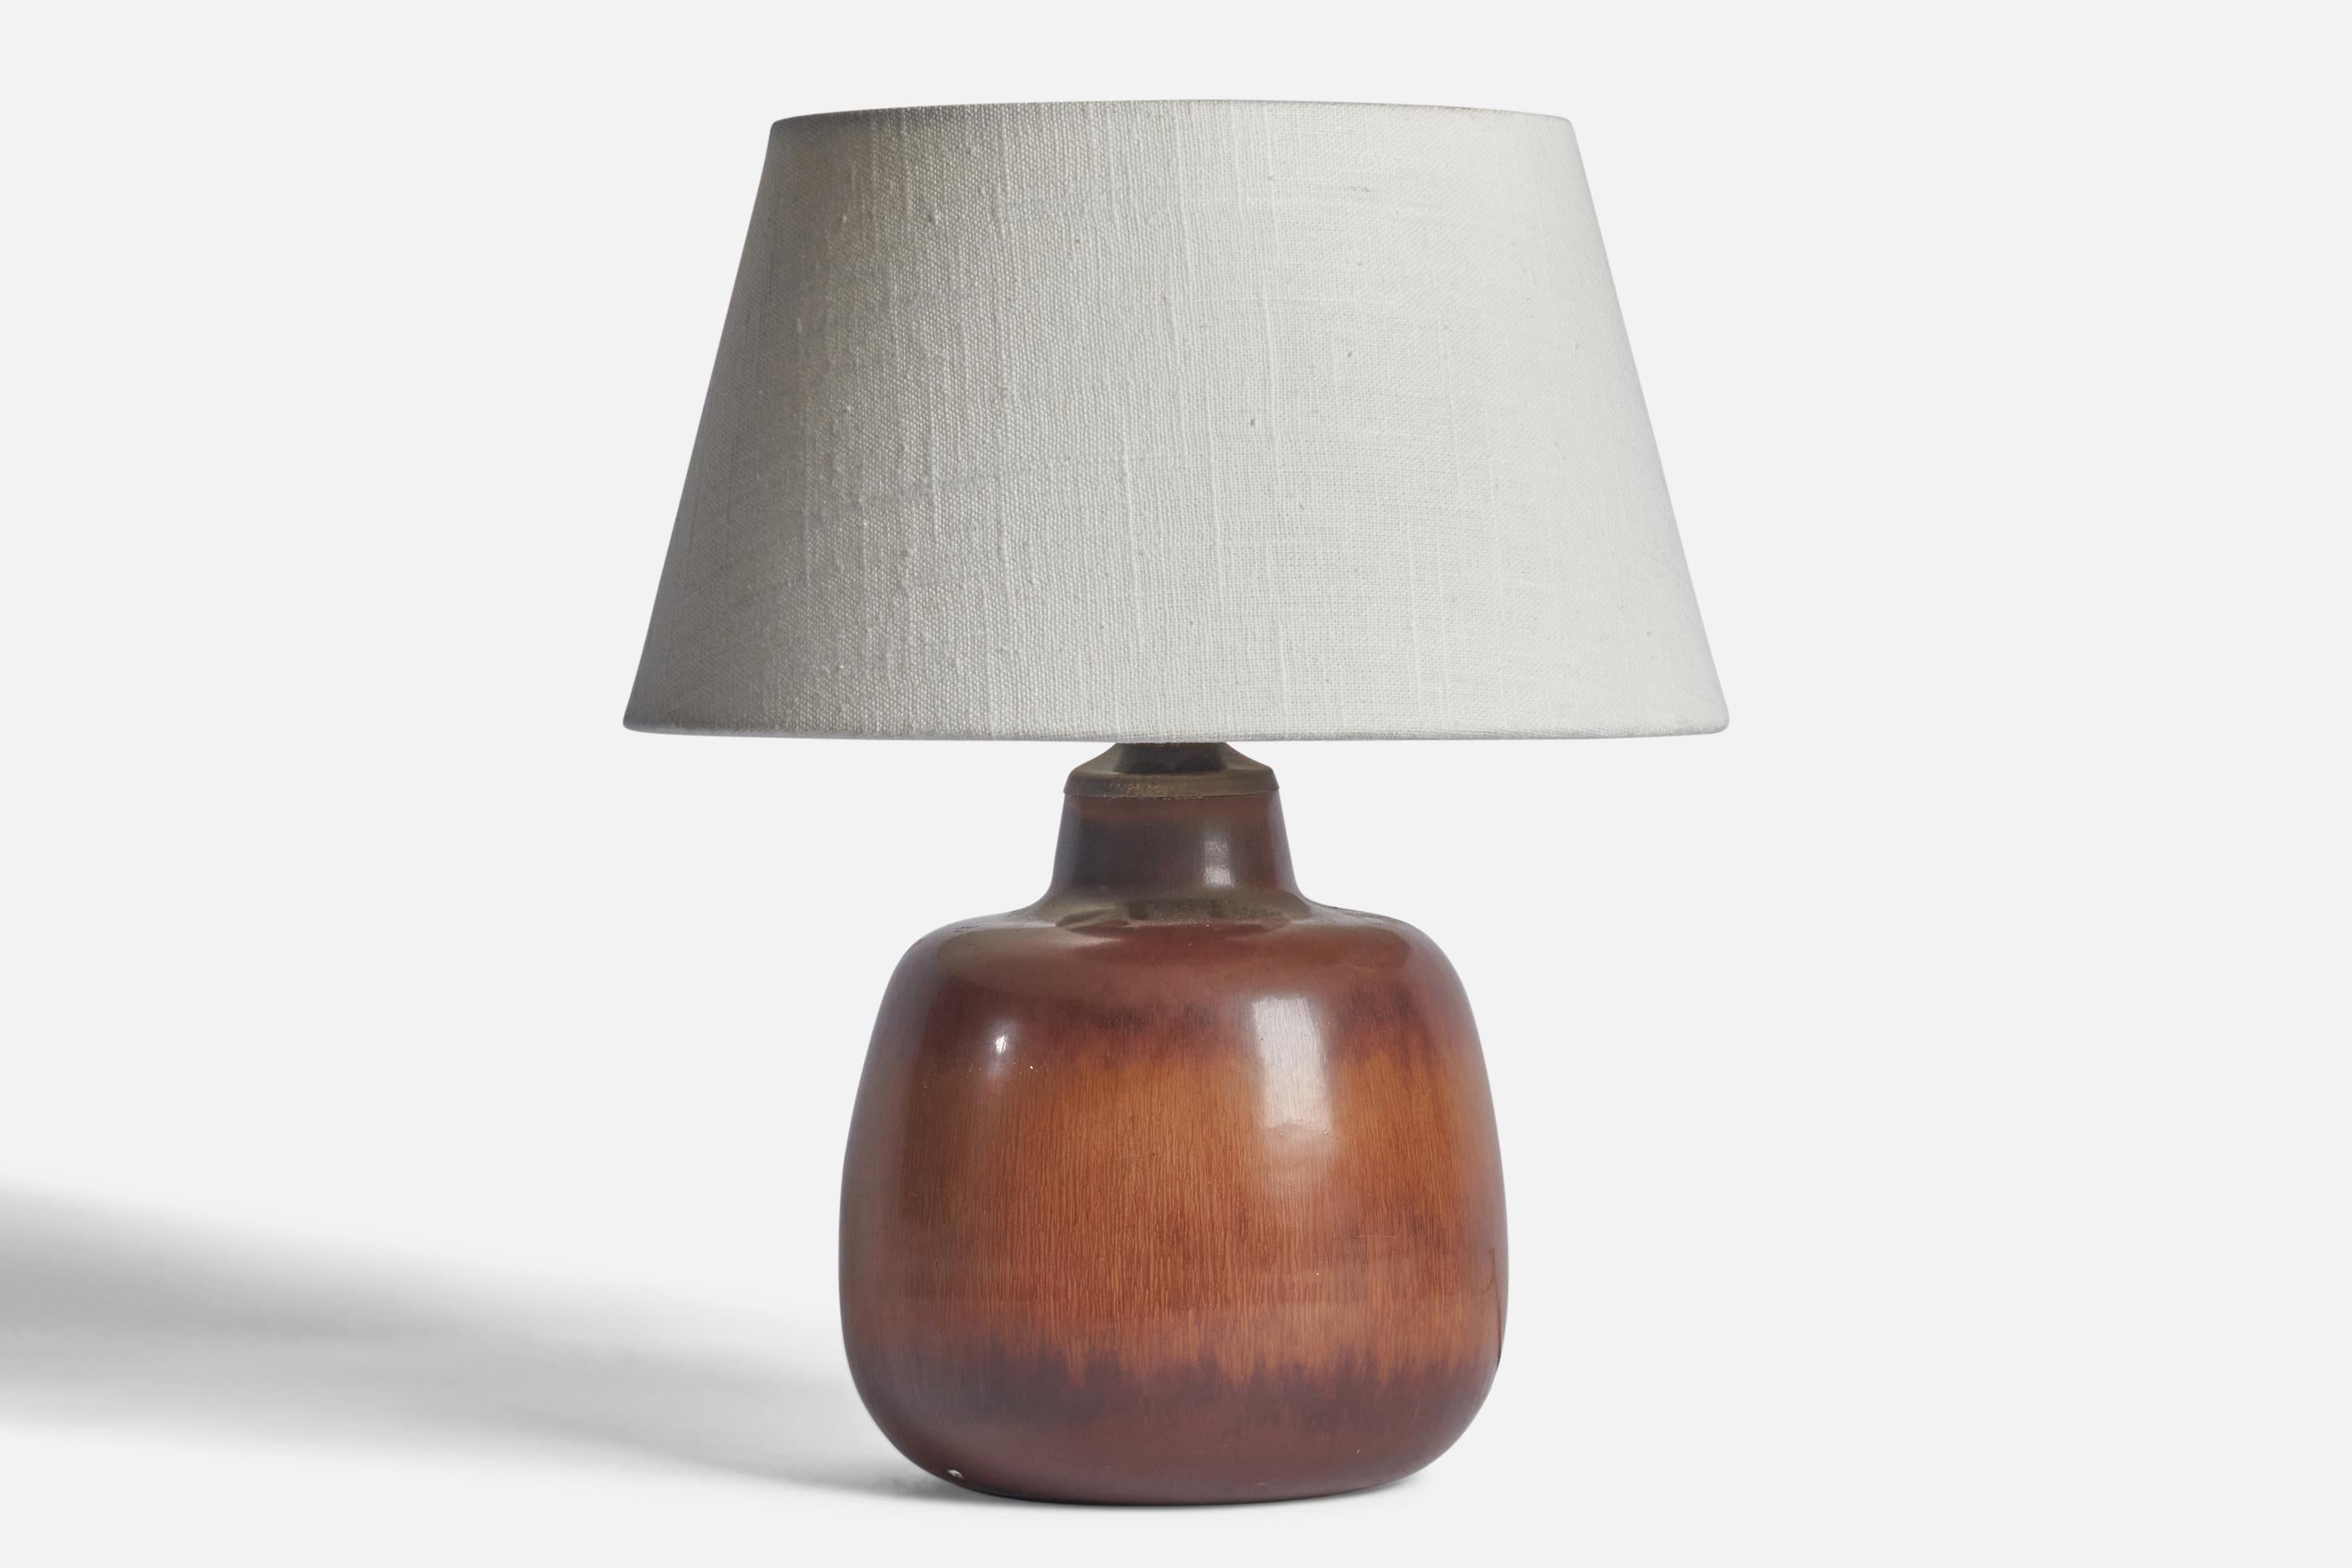 A brown-glazed stoneware table lamp designed by Carl-Harry Stålhane and produced by Rörstrand, Sweden, 1950s.

Dimensions of Lamp (inches): 9.25